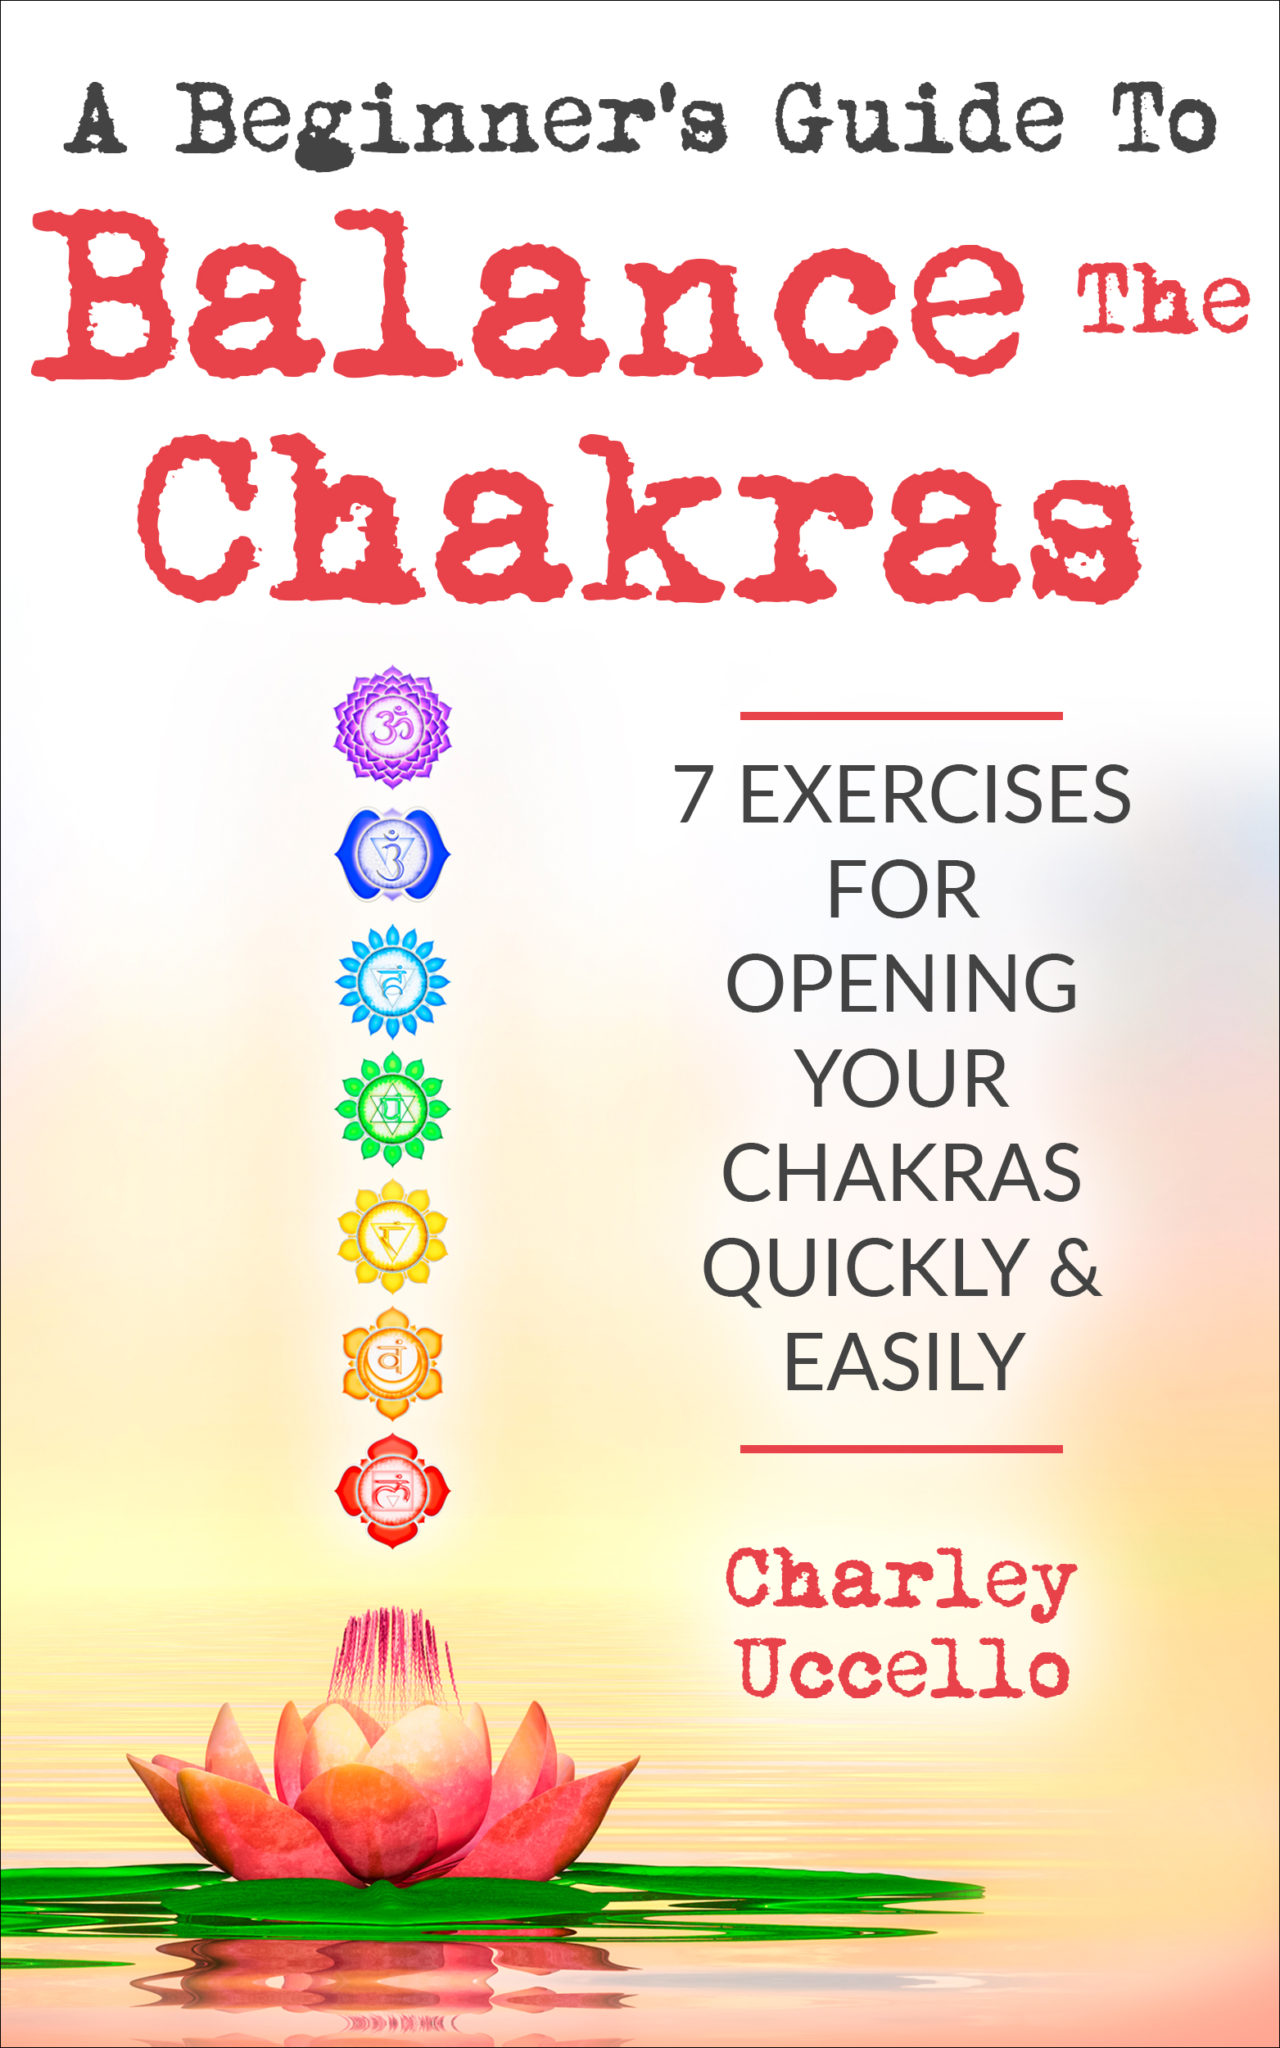 FREE: A Beginner’s Guide To Balance The Chakras by Charley Uccello